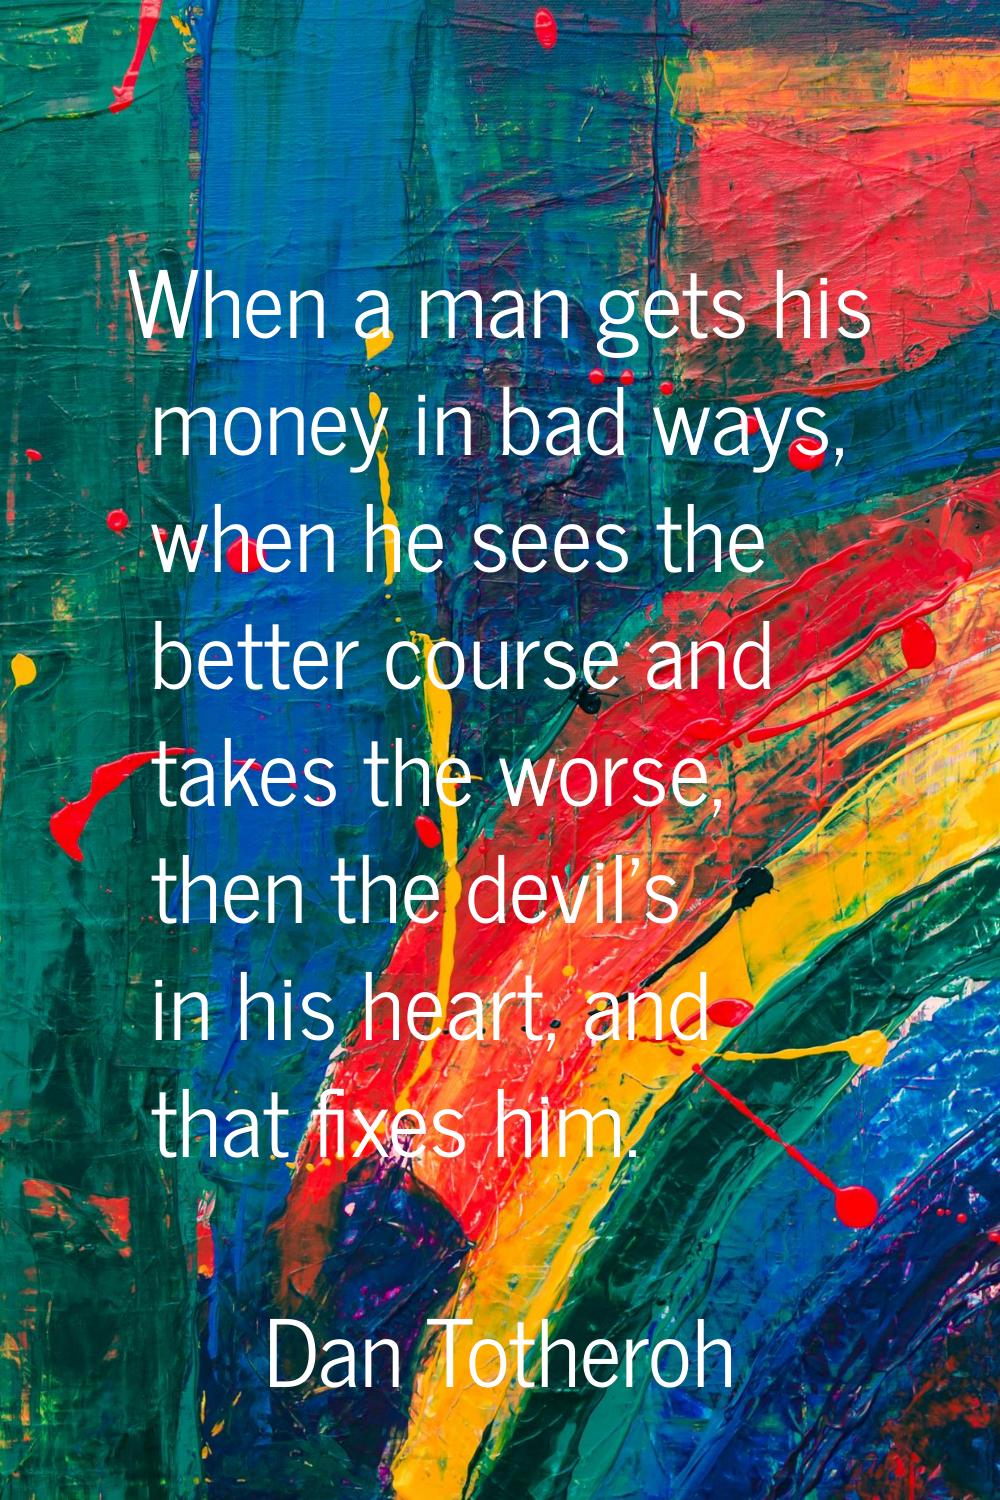 When a man gets his money in bad ways, when he sees the better course and takes the worse, then the